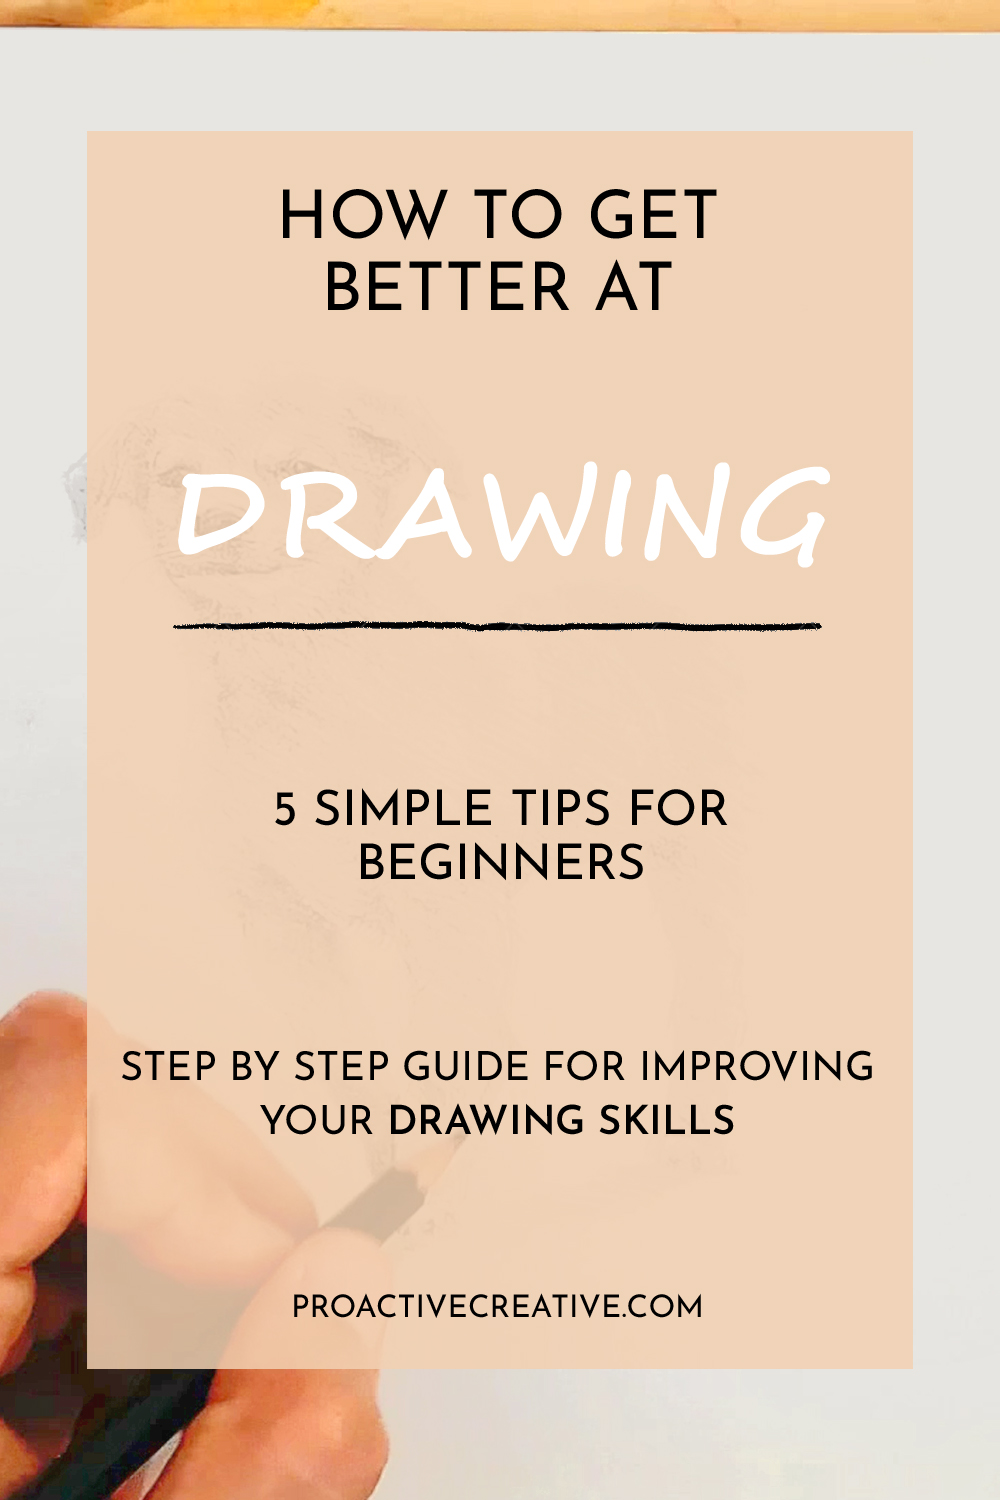 How to get better at drawing